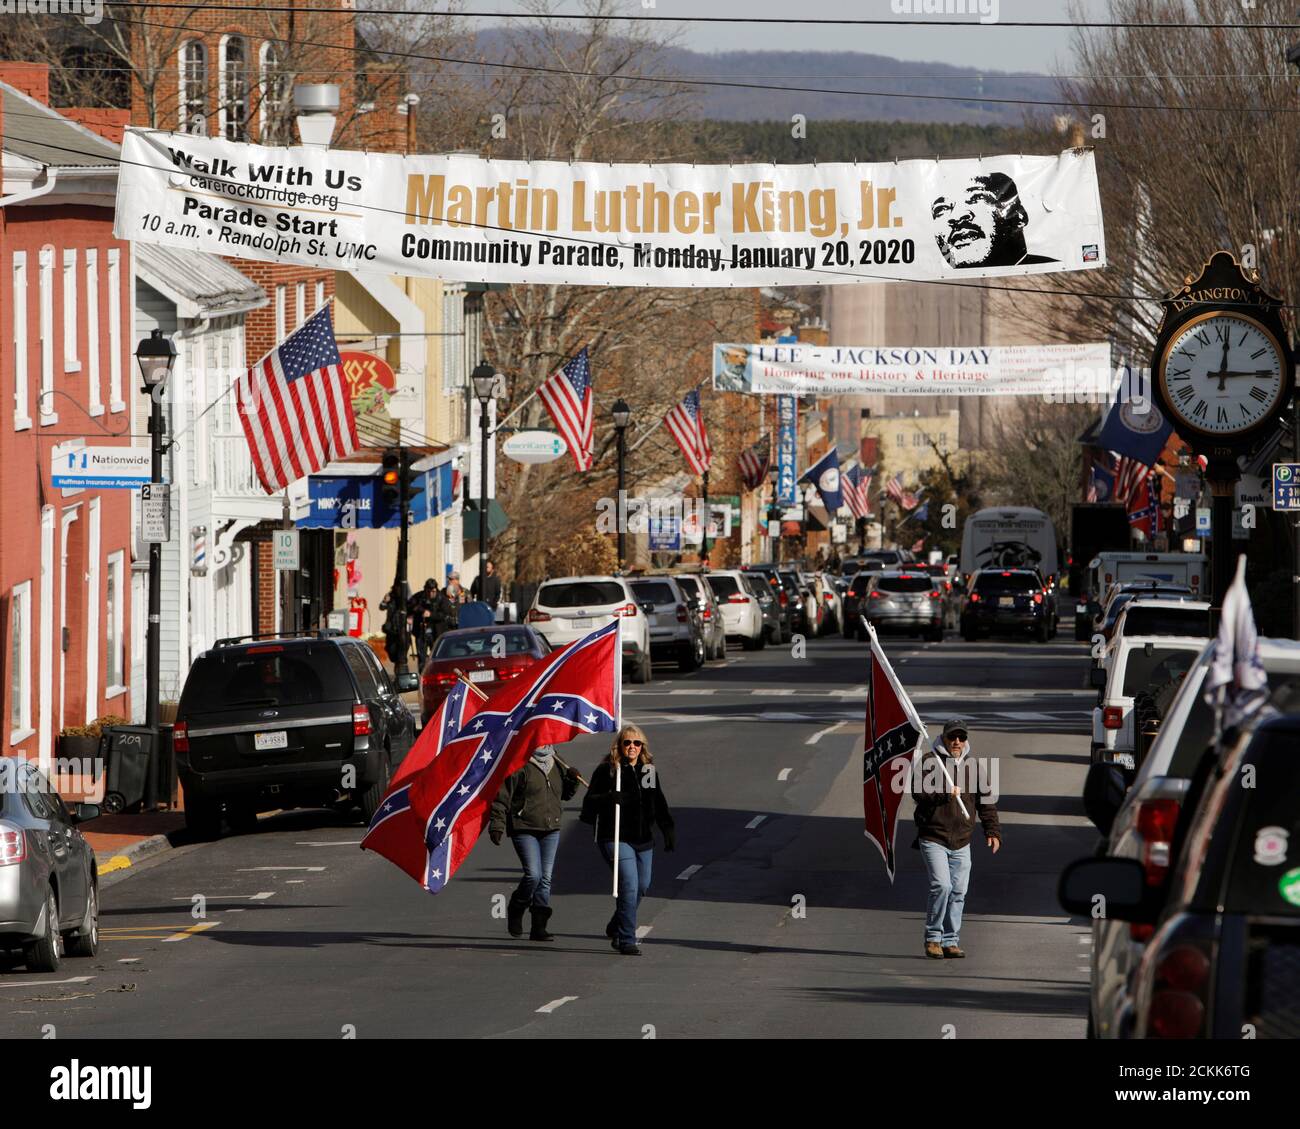 Supporters of Confederate statues and symbols carry Confederate flags as  they walk under a sign commemorating the upcoming Martin Luther King Jr. Day,  during the Lee-Jackson Day state holiday in Lexington, Virginia,